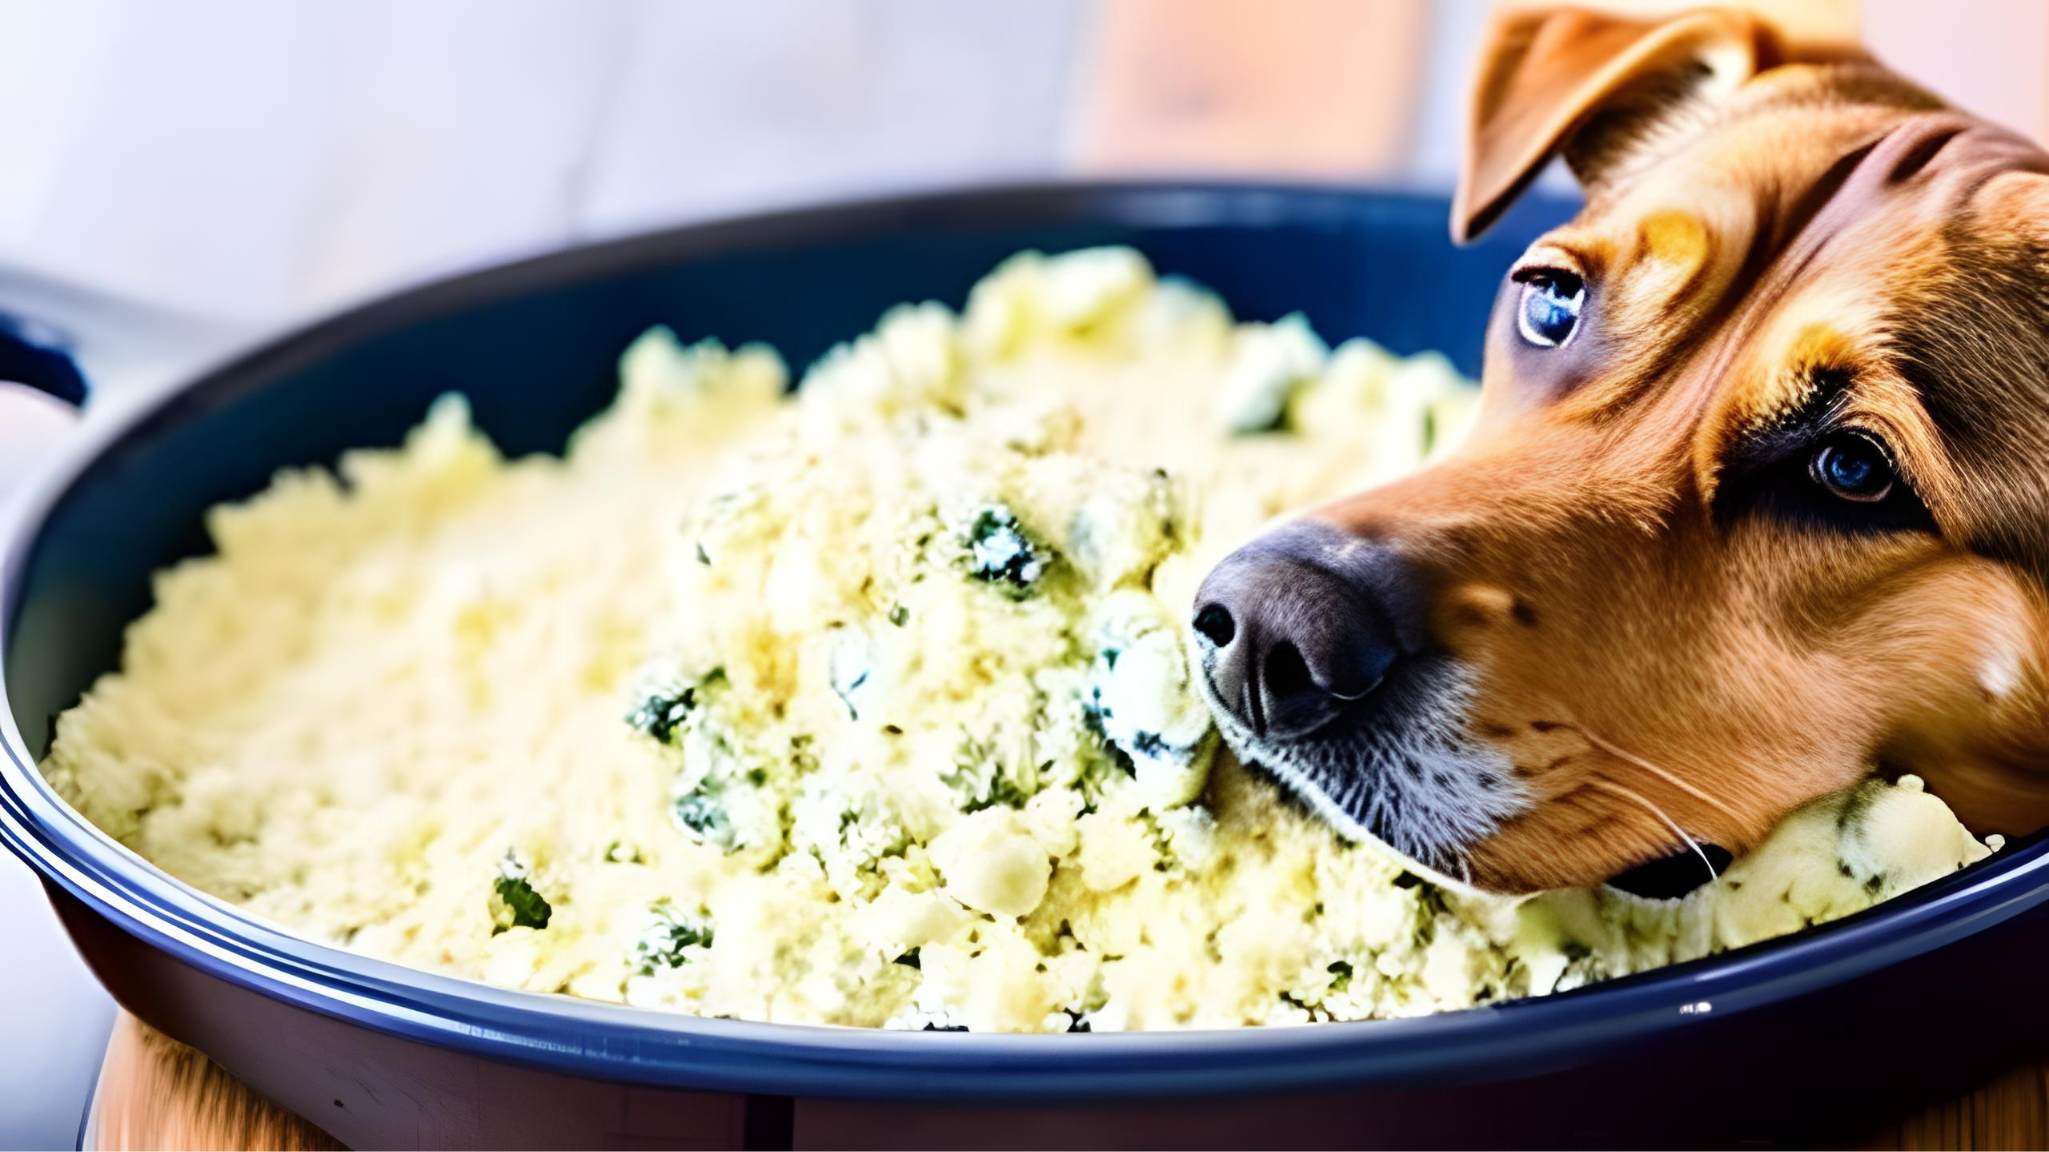 Can Dogs Eat Blue Cheese Crumbles?